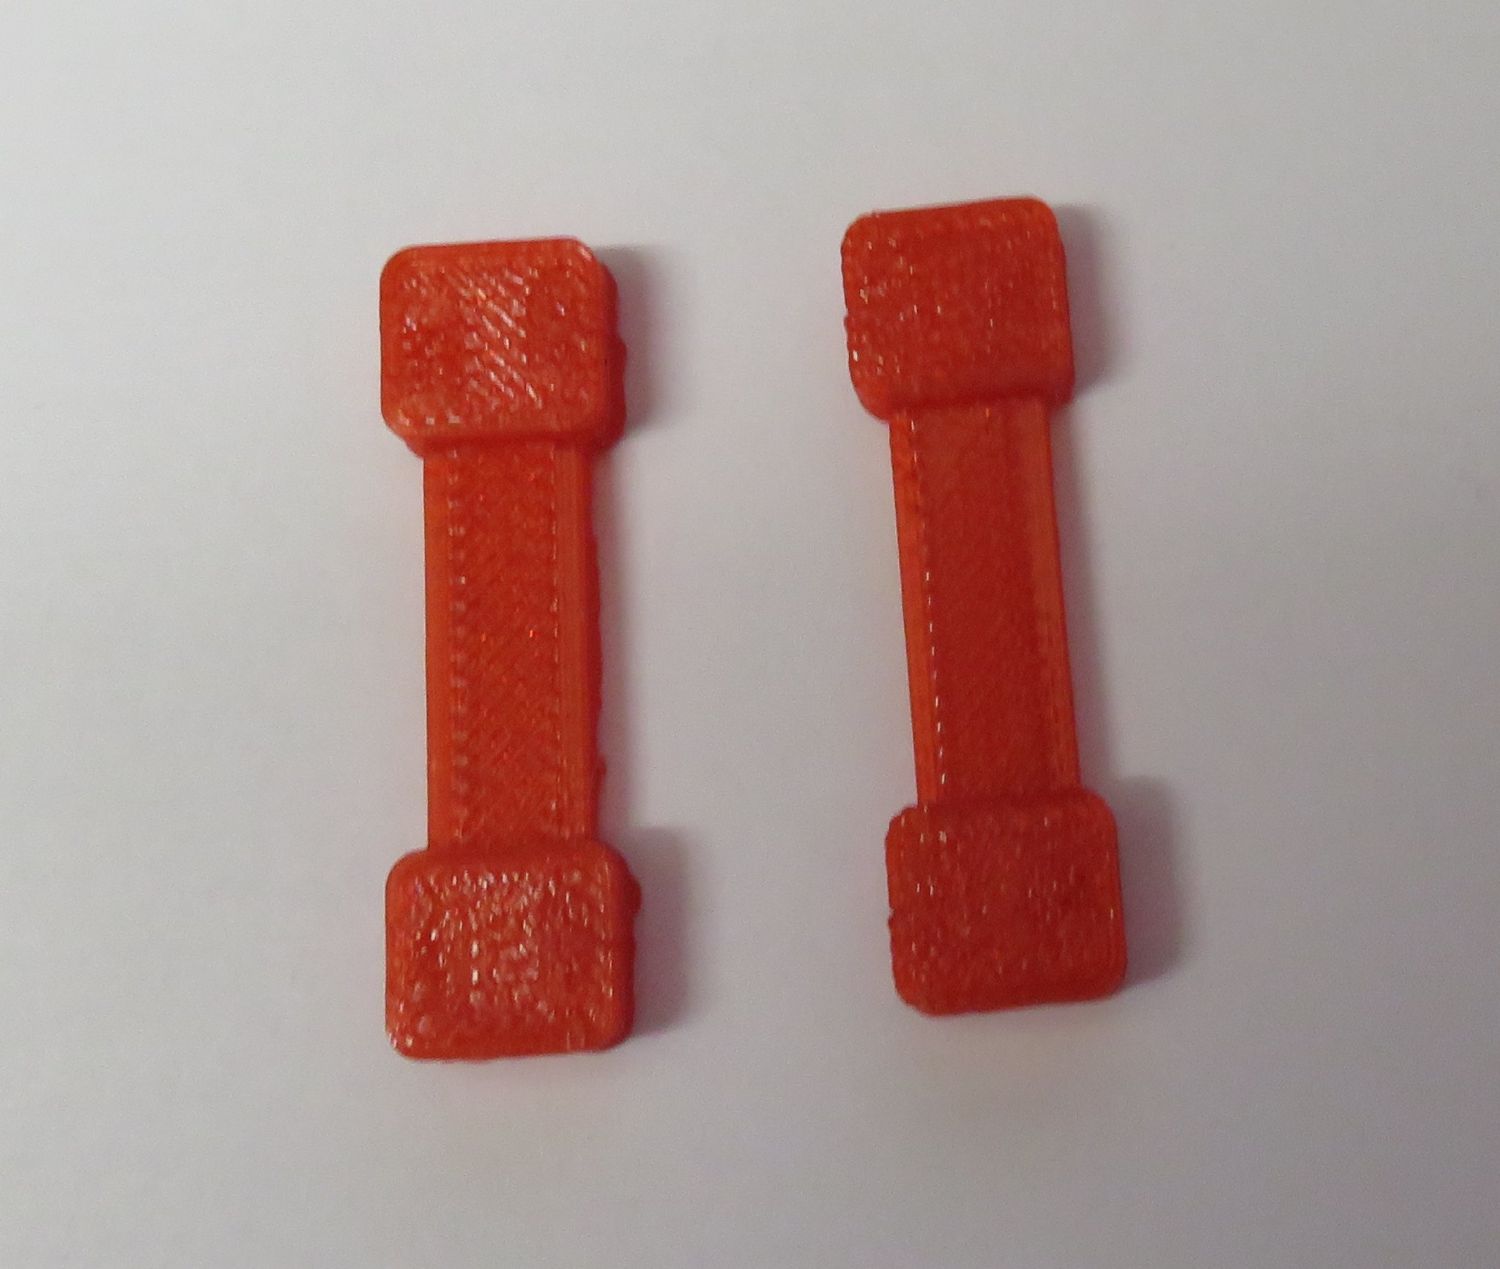 N Scale Track Spacers for Peco Setrack - pack of 2